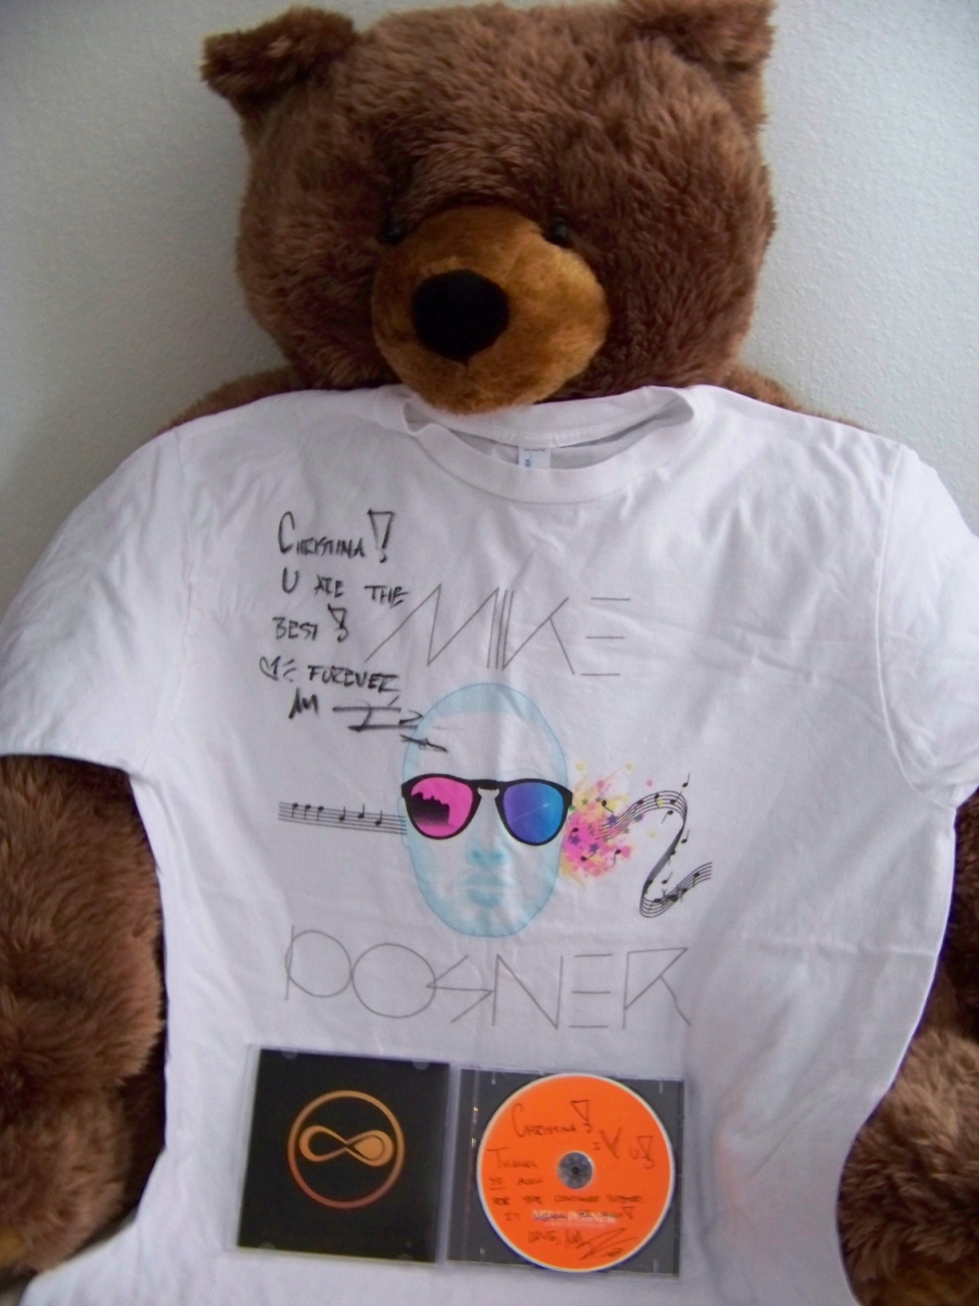 Teddy Bear given to me by Mike Posner, and he autographed my T-shirt and CD - Six Flags Over Texas - Arlington, TX 8/4/11
Photo by Christina
MikePosner.net
